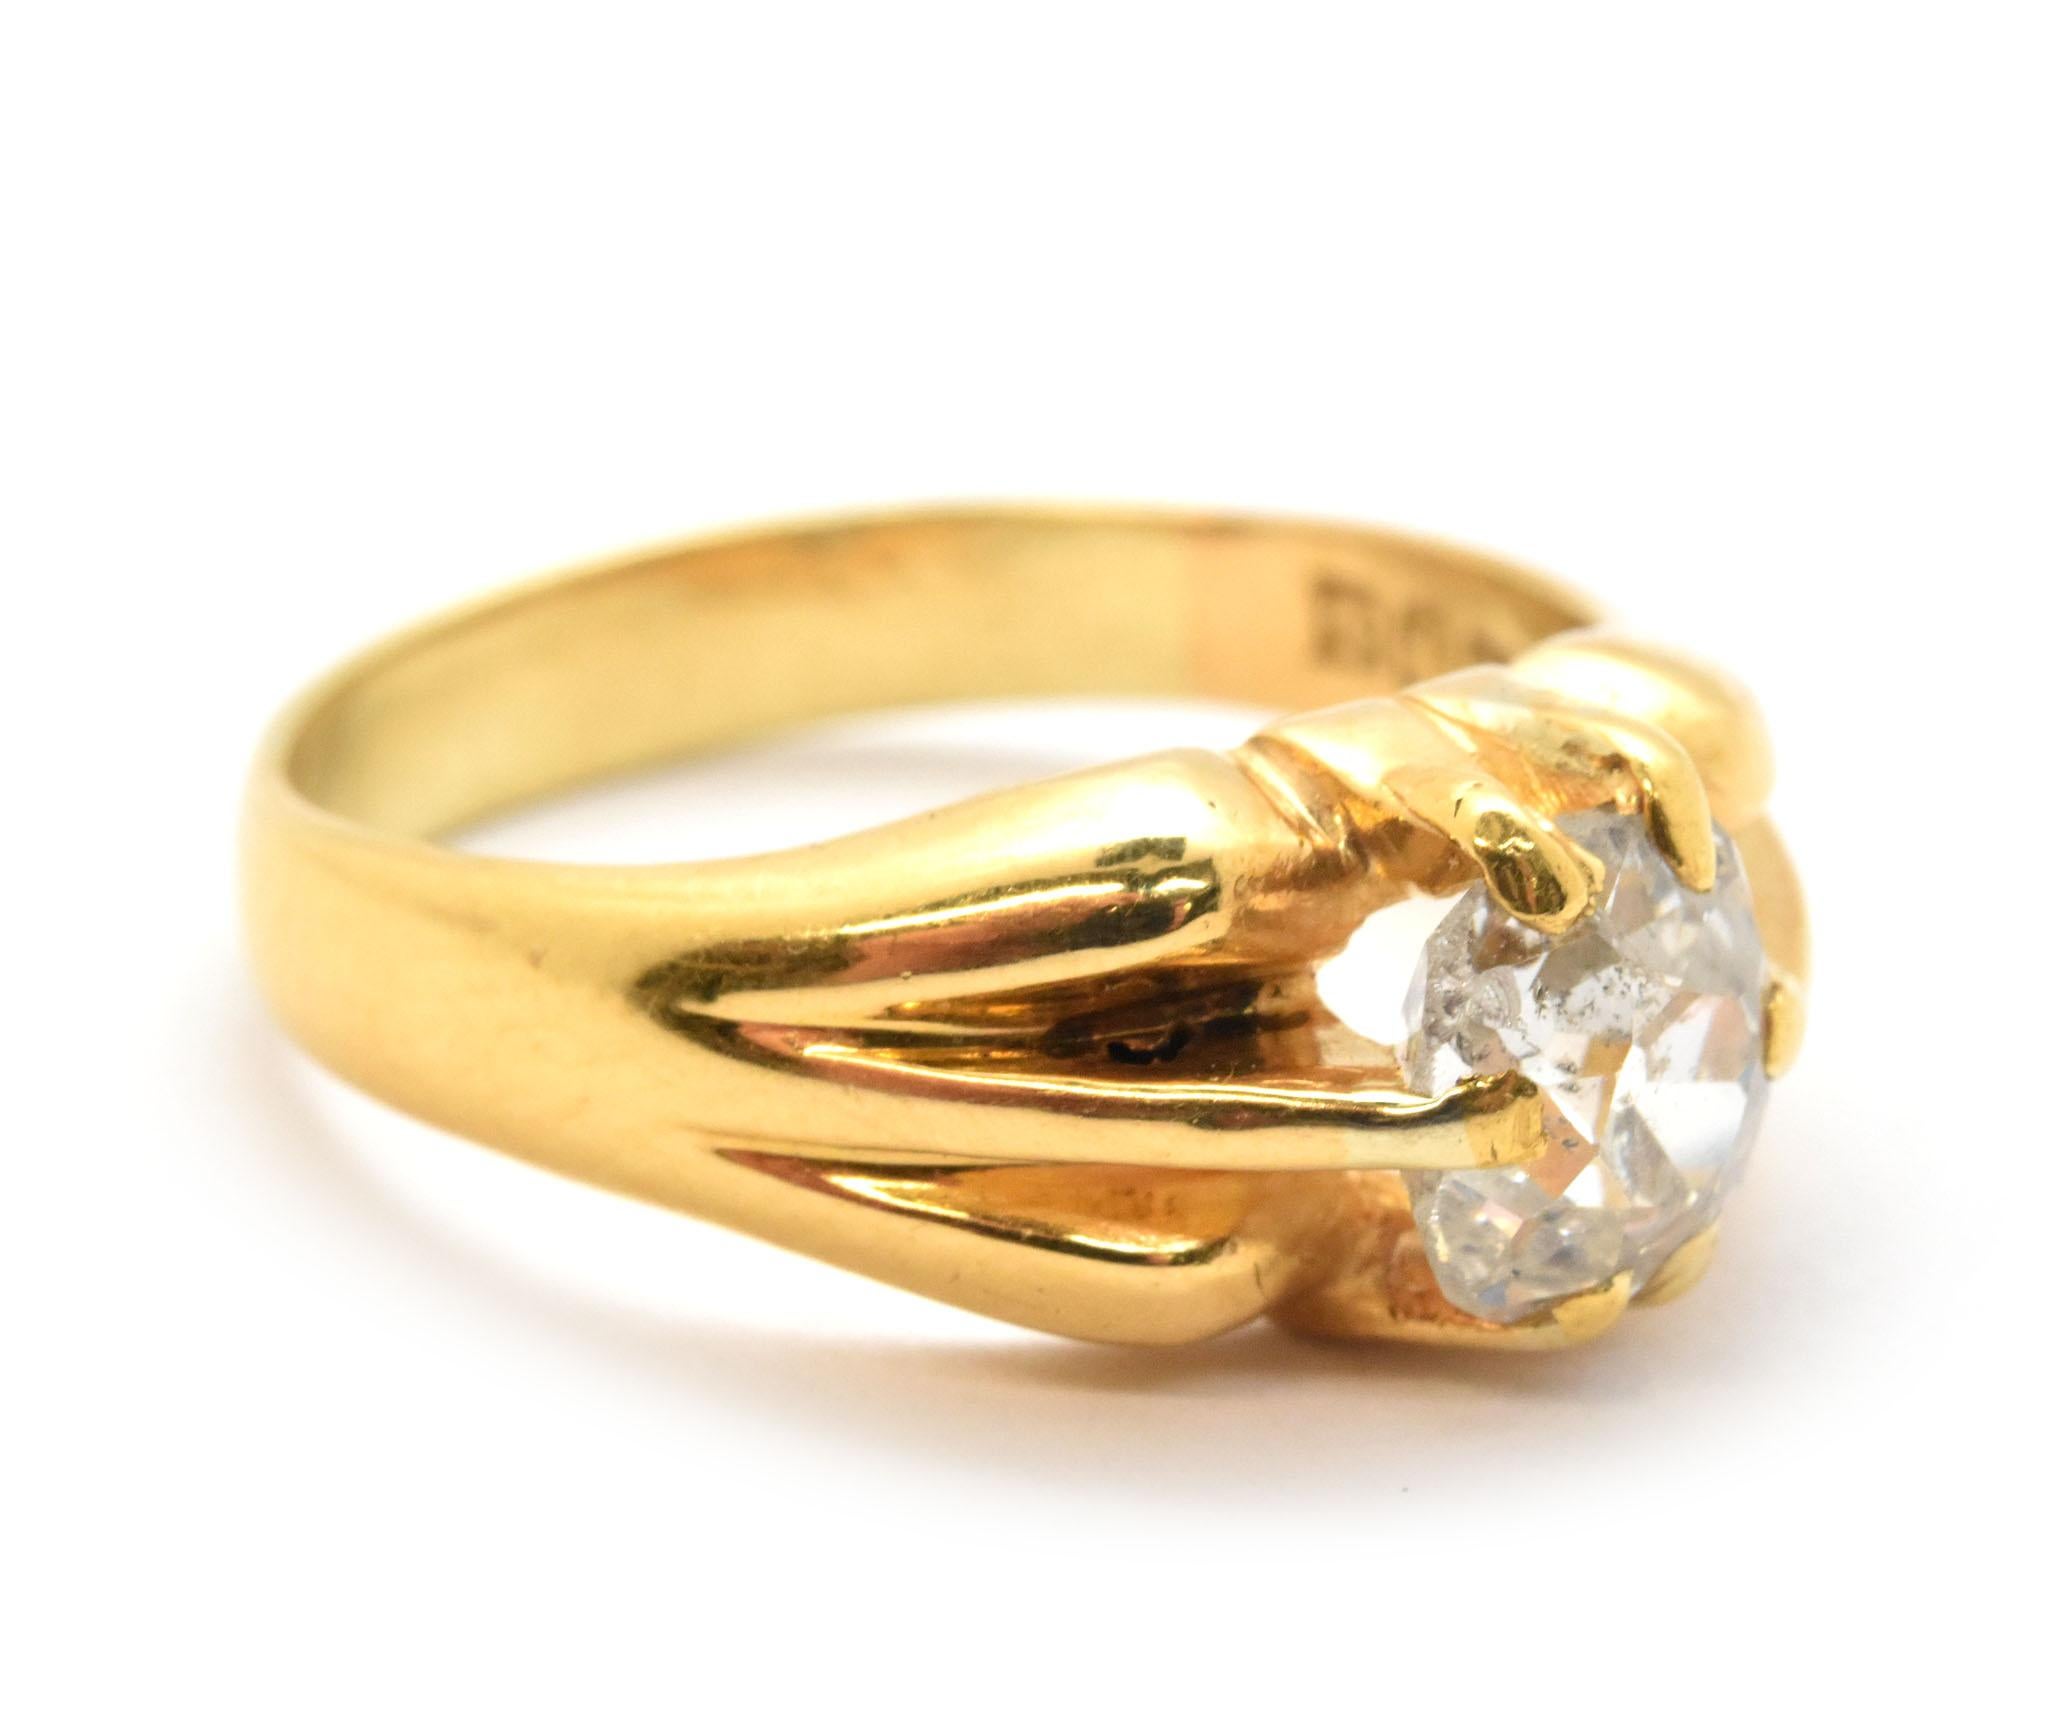 This beautiful ring is made in 21k yellow gold, and it features a 1.10-carat mine-cut diamond at its center. The diamond is graded H in color and SI2 in clarity. The ring measures 8mm wide, and it weighs 8.17 grams. It is a size 7.75.